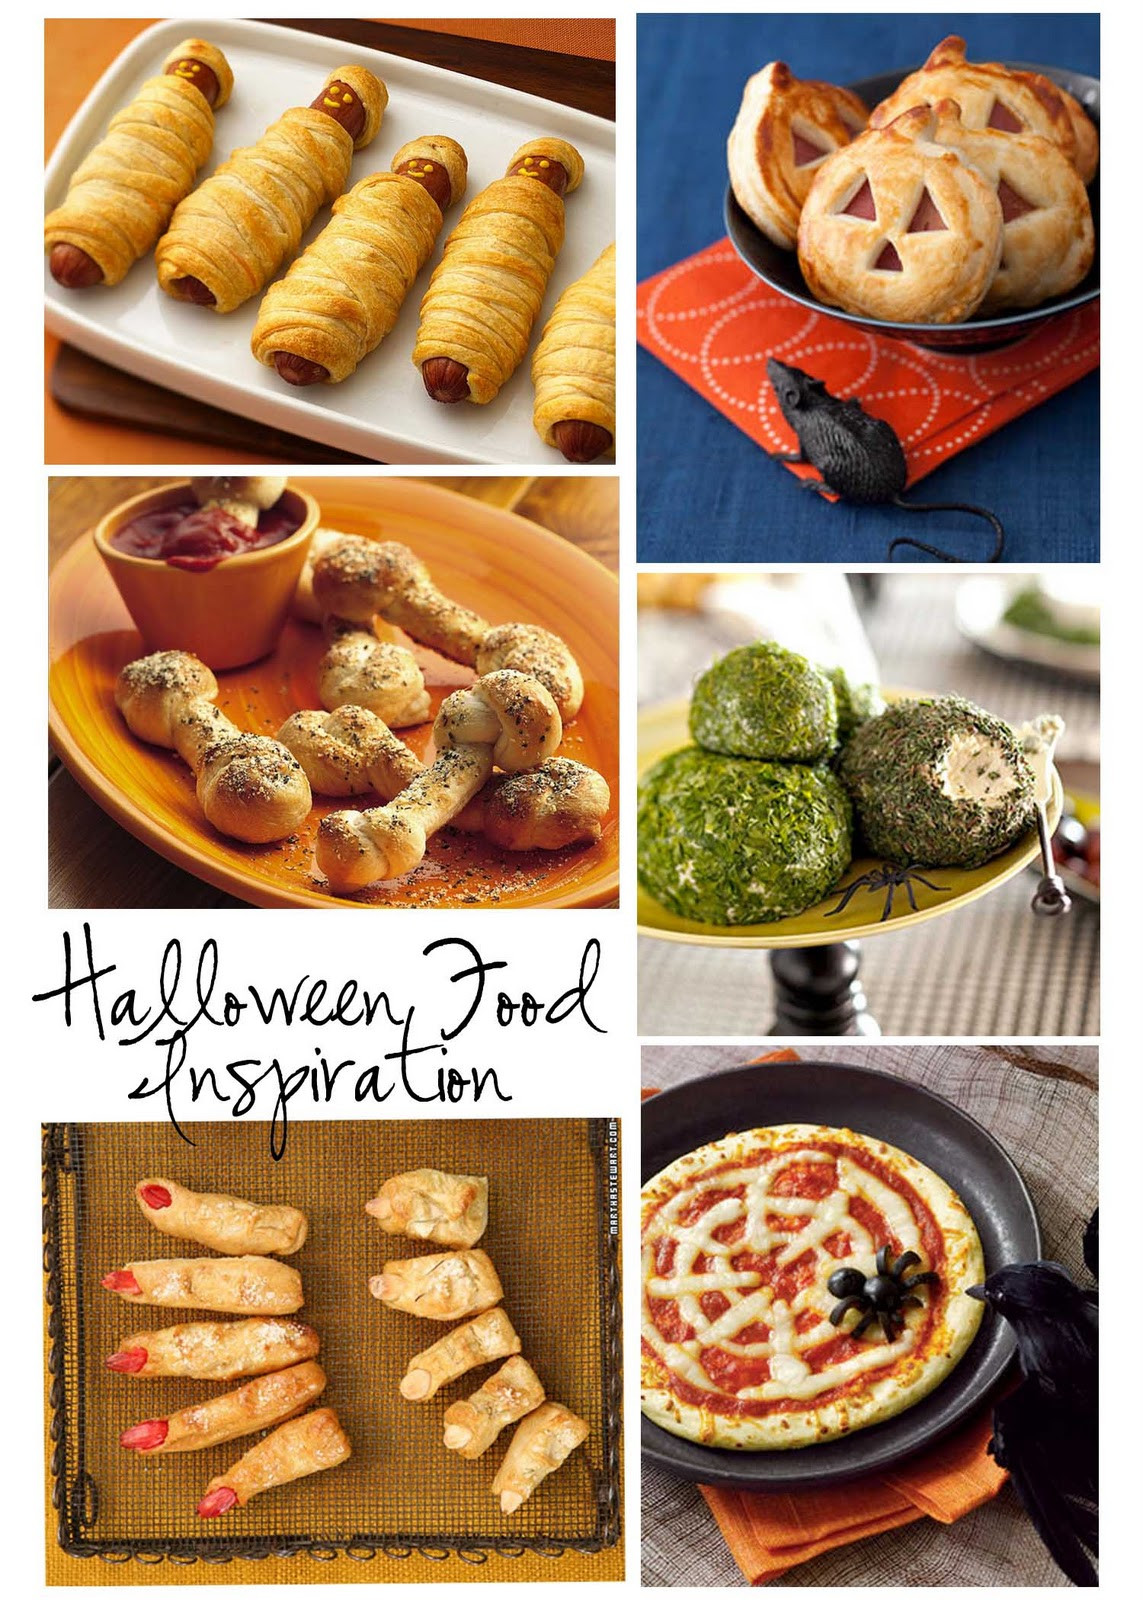 Spooky Party Food Ideas For Halloween
 Room to Inspire Spooky Food Ideas